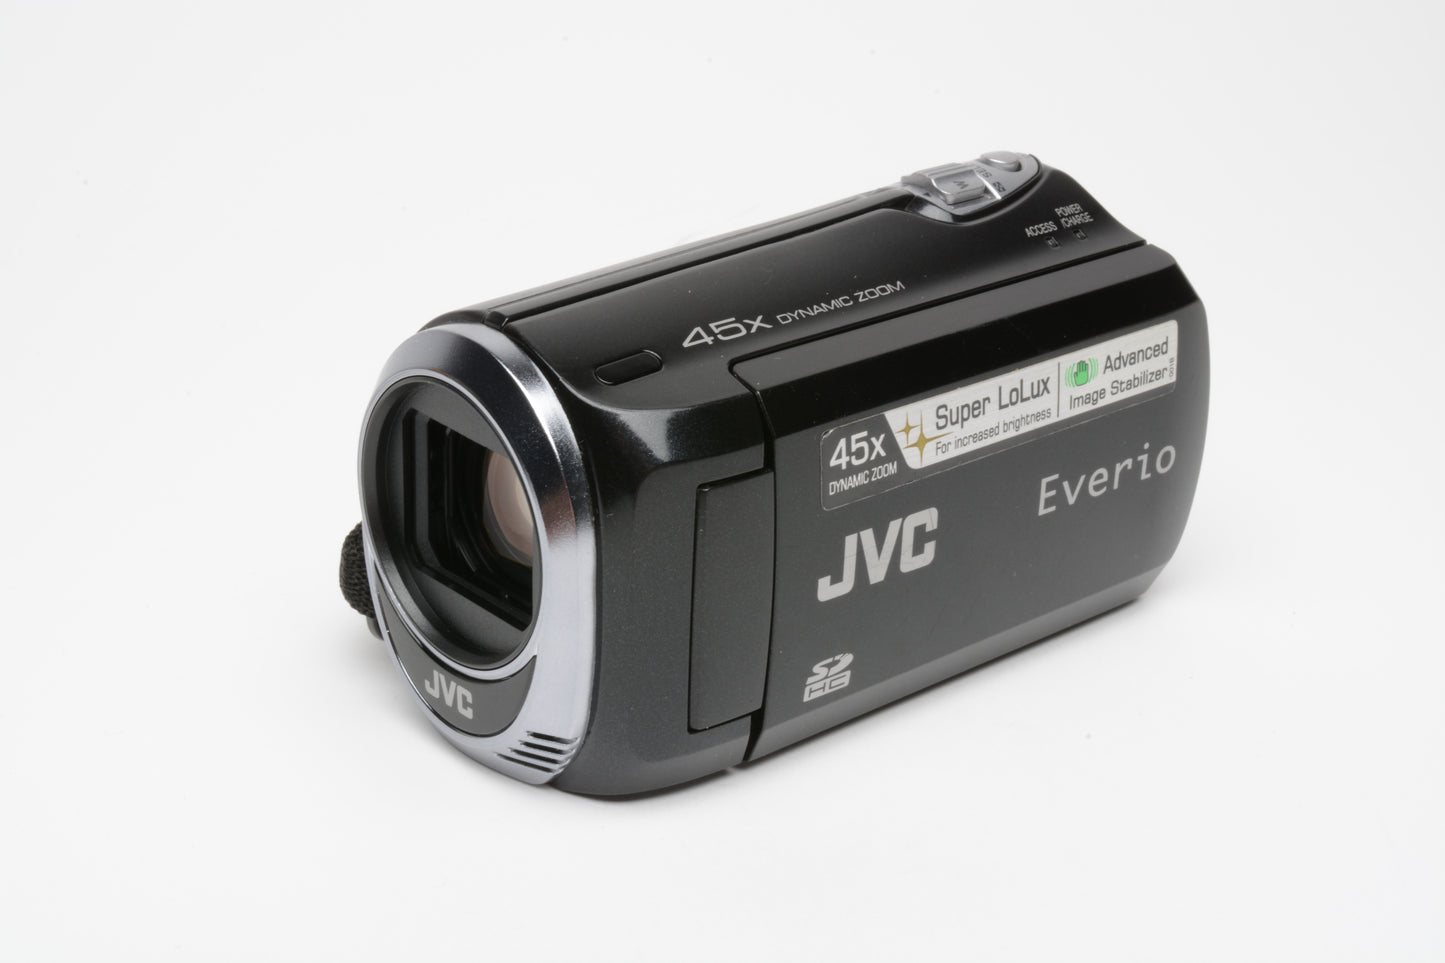 JVC Everio S GZ-MS110 SD card video camera, boxed, 16GB SD, cables, batt+AC, tested